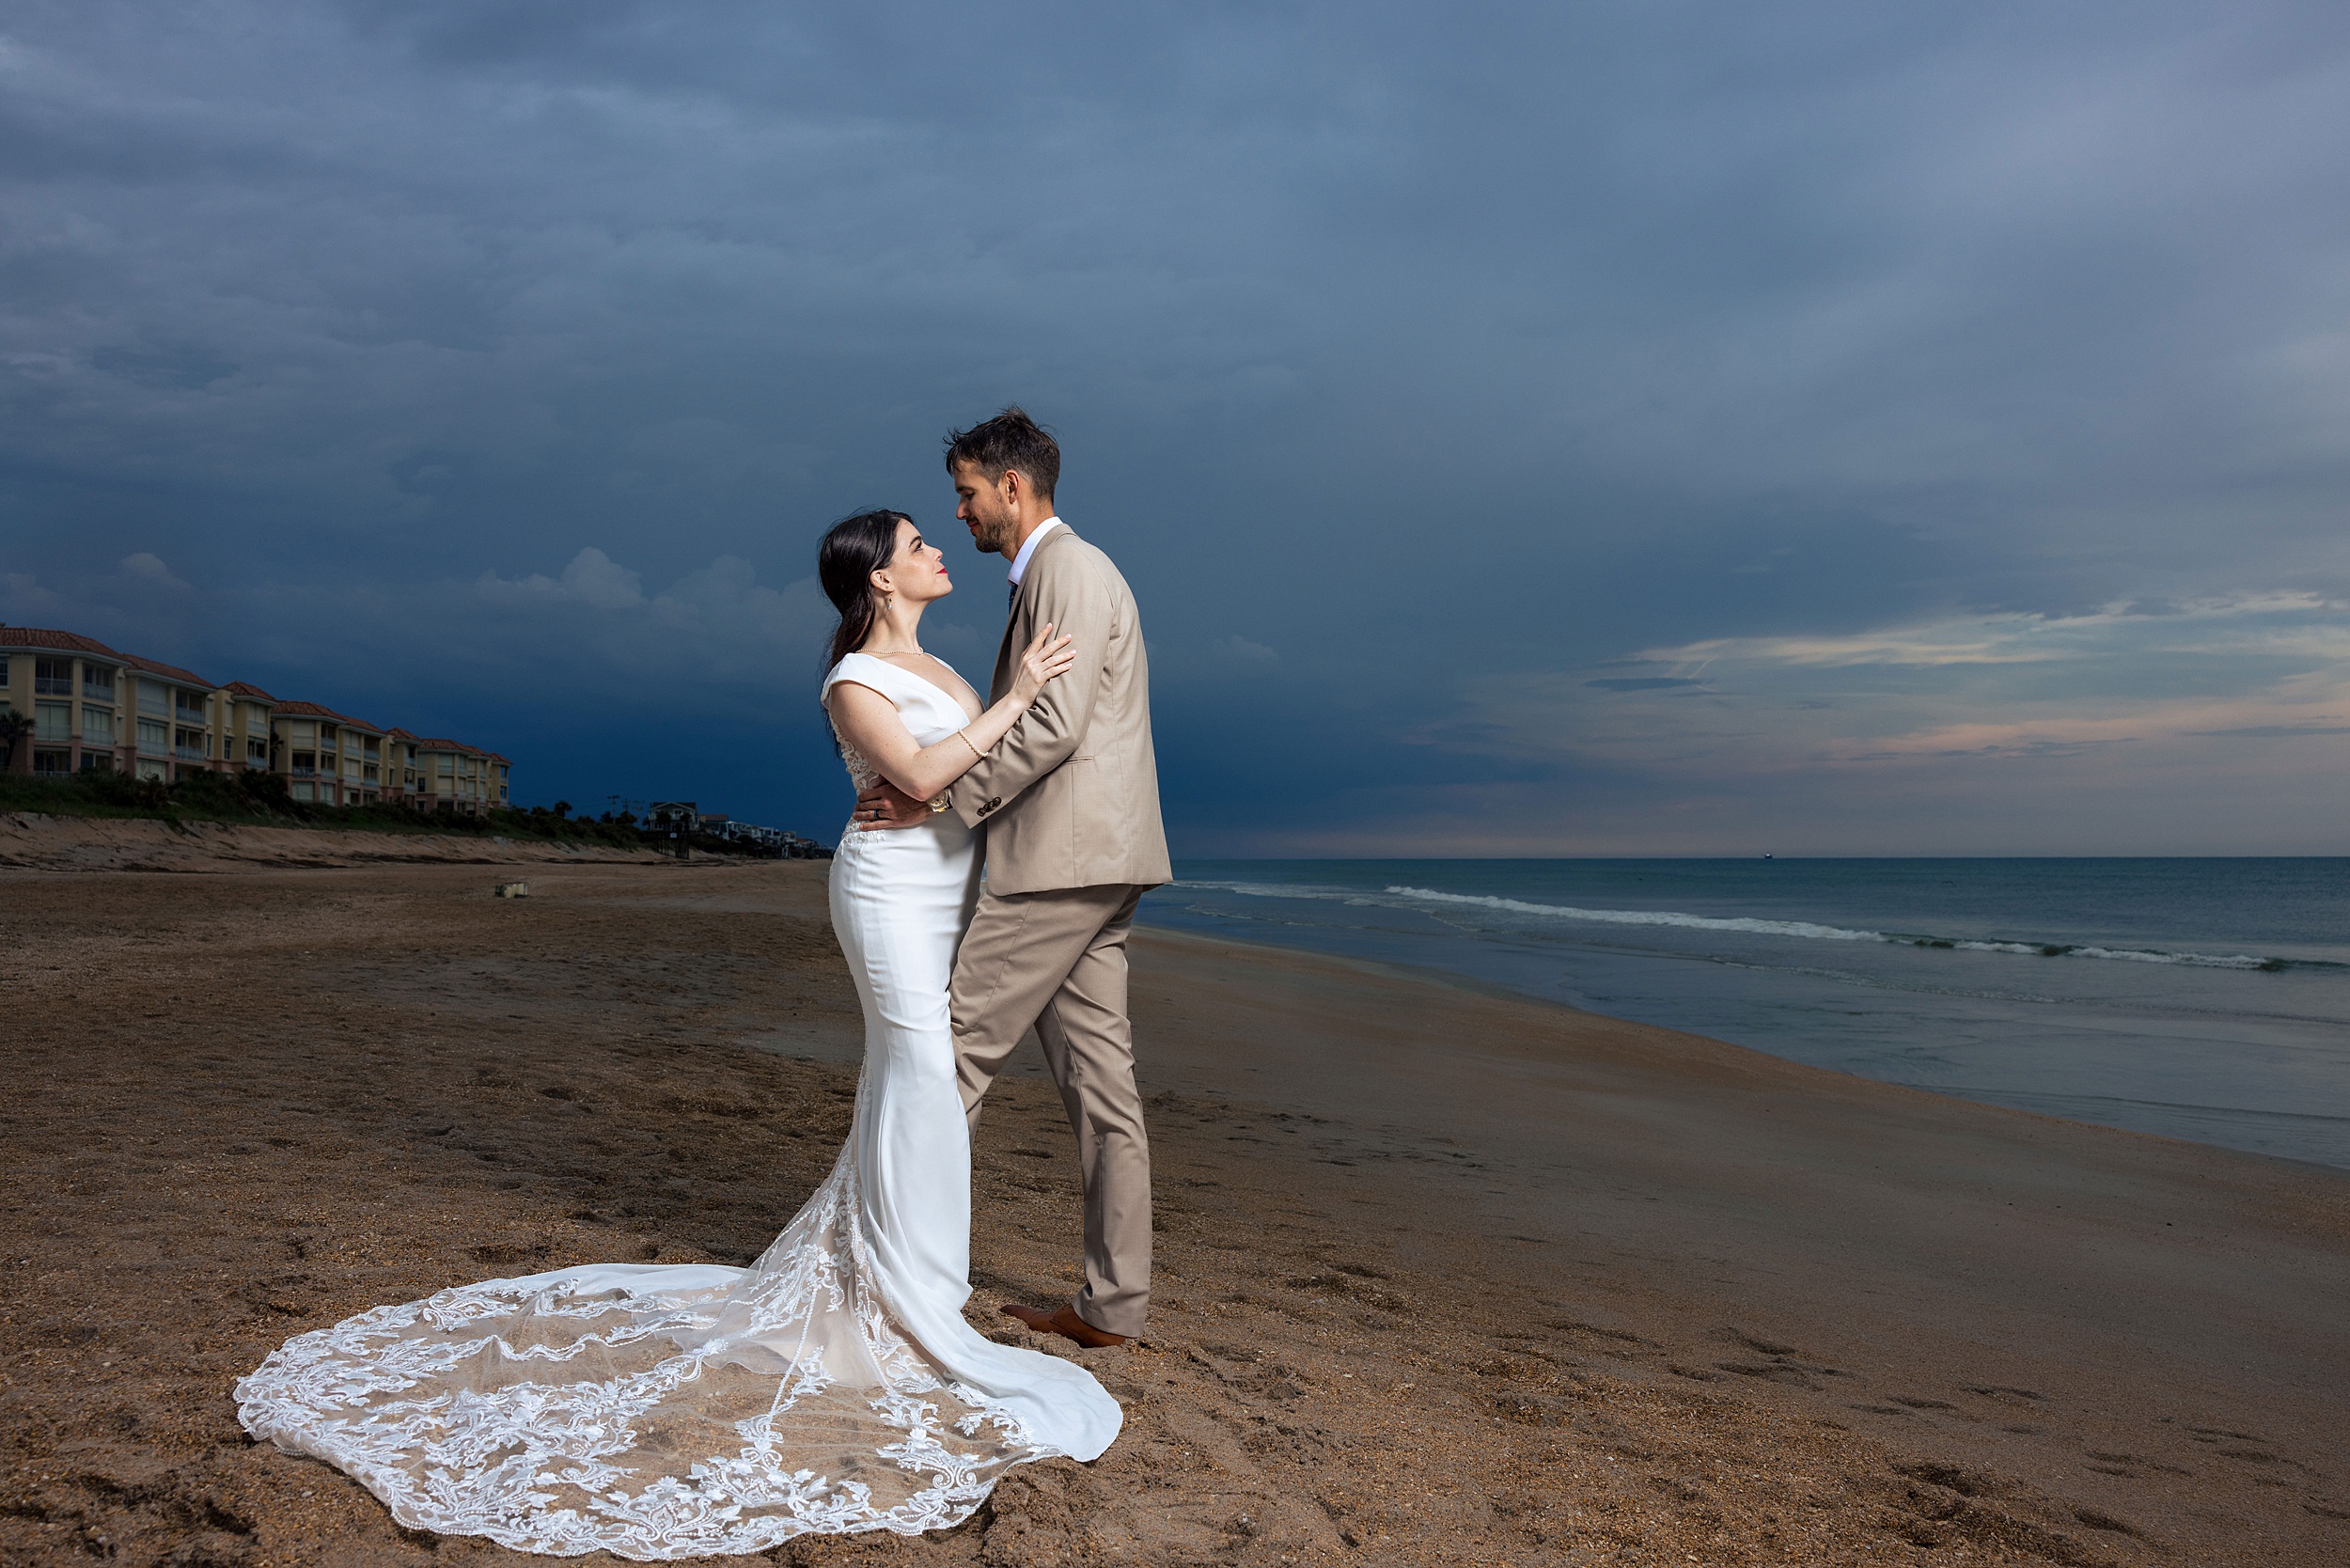 Newlyweds stand on the beach staring into each other's eyes at sunset